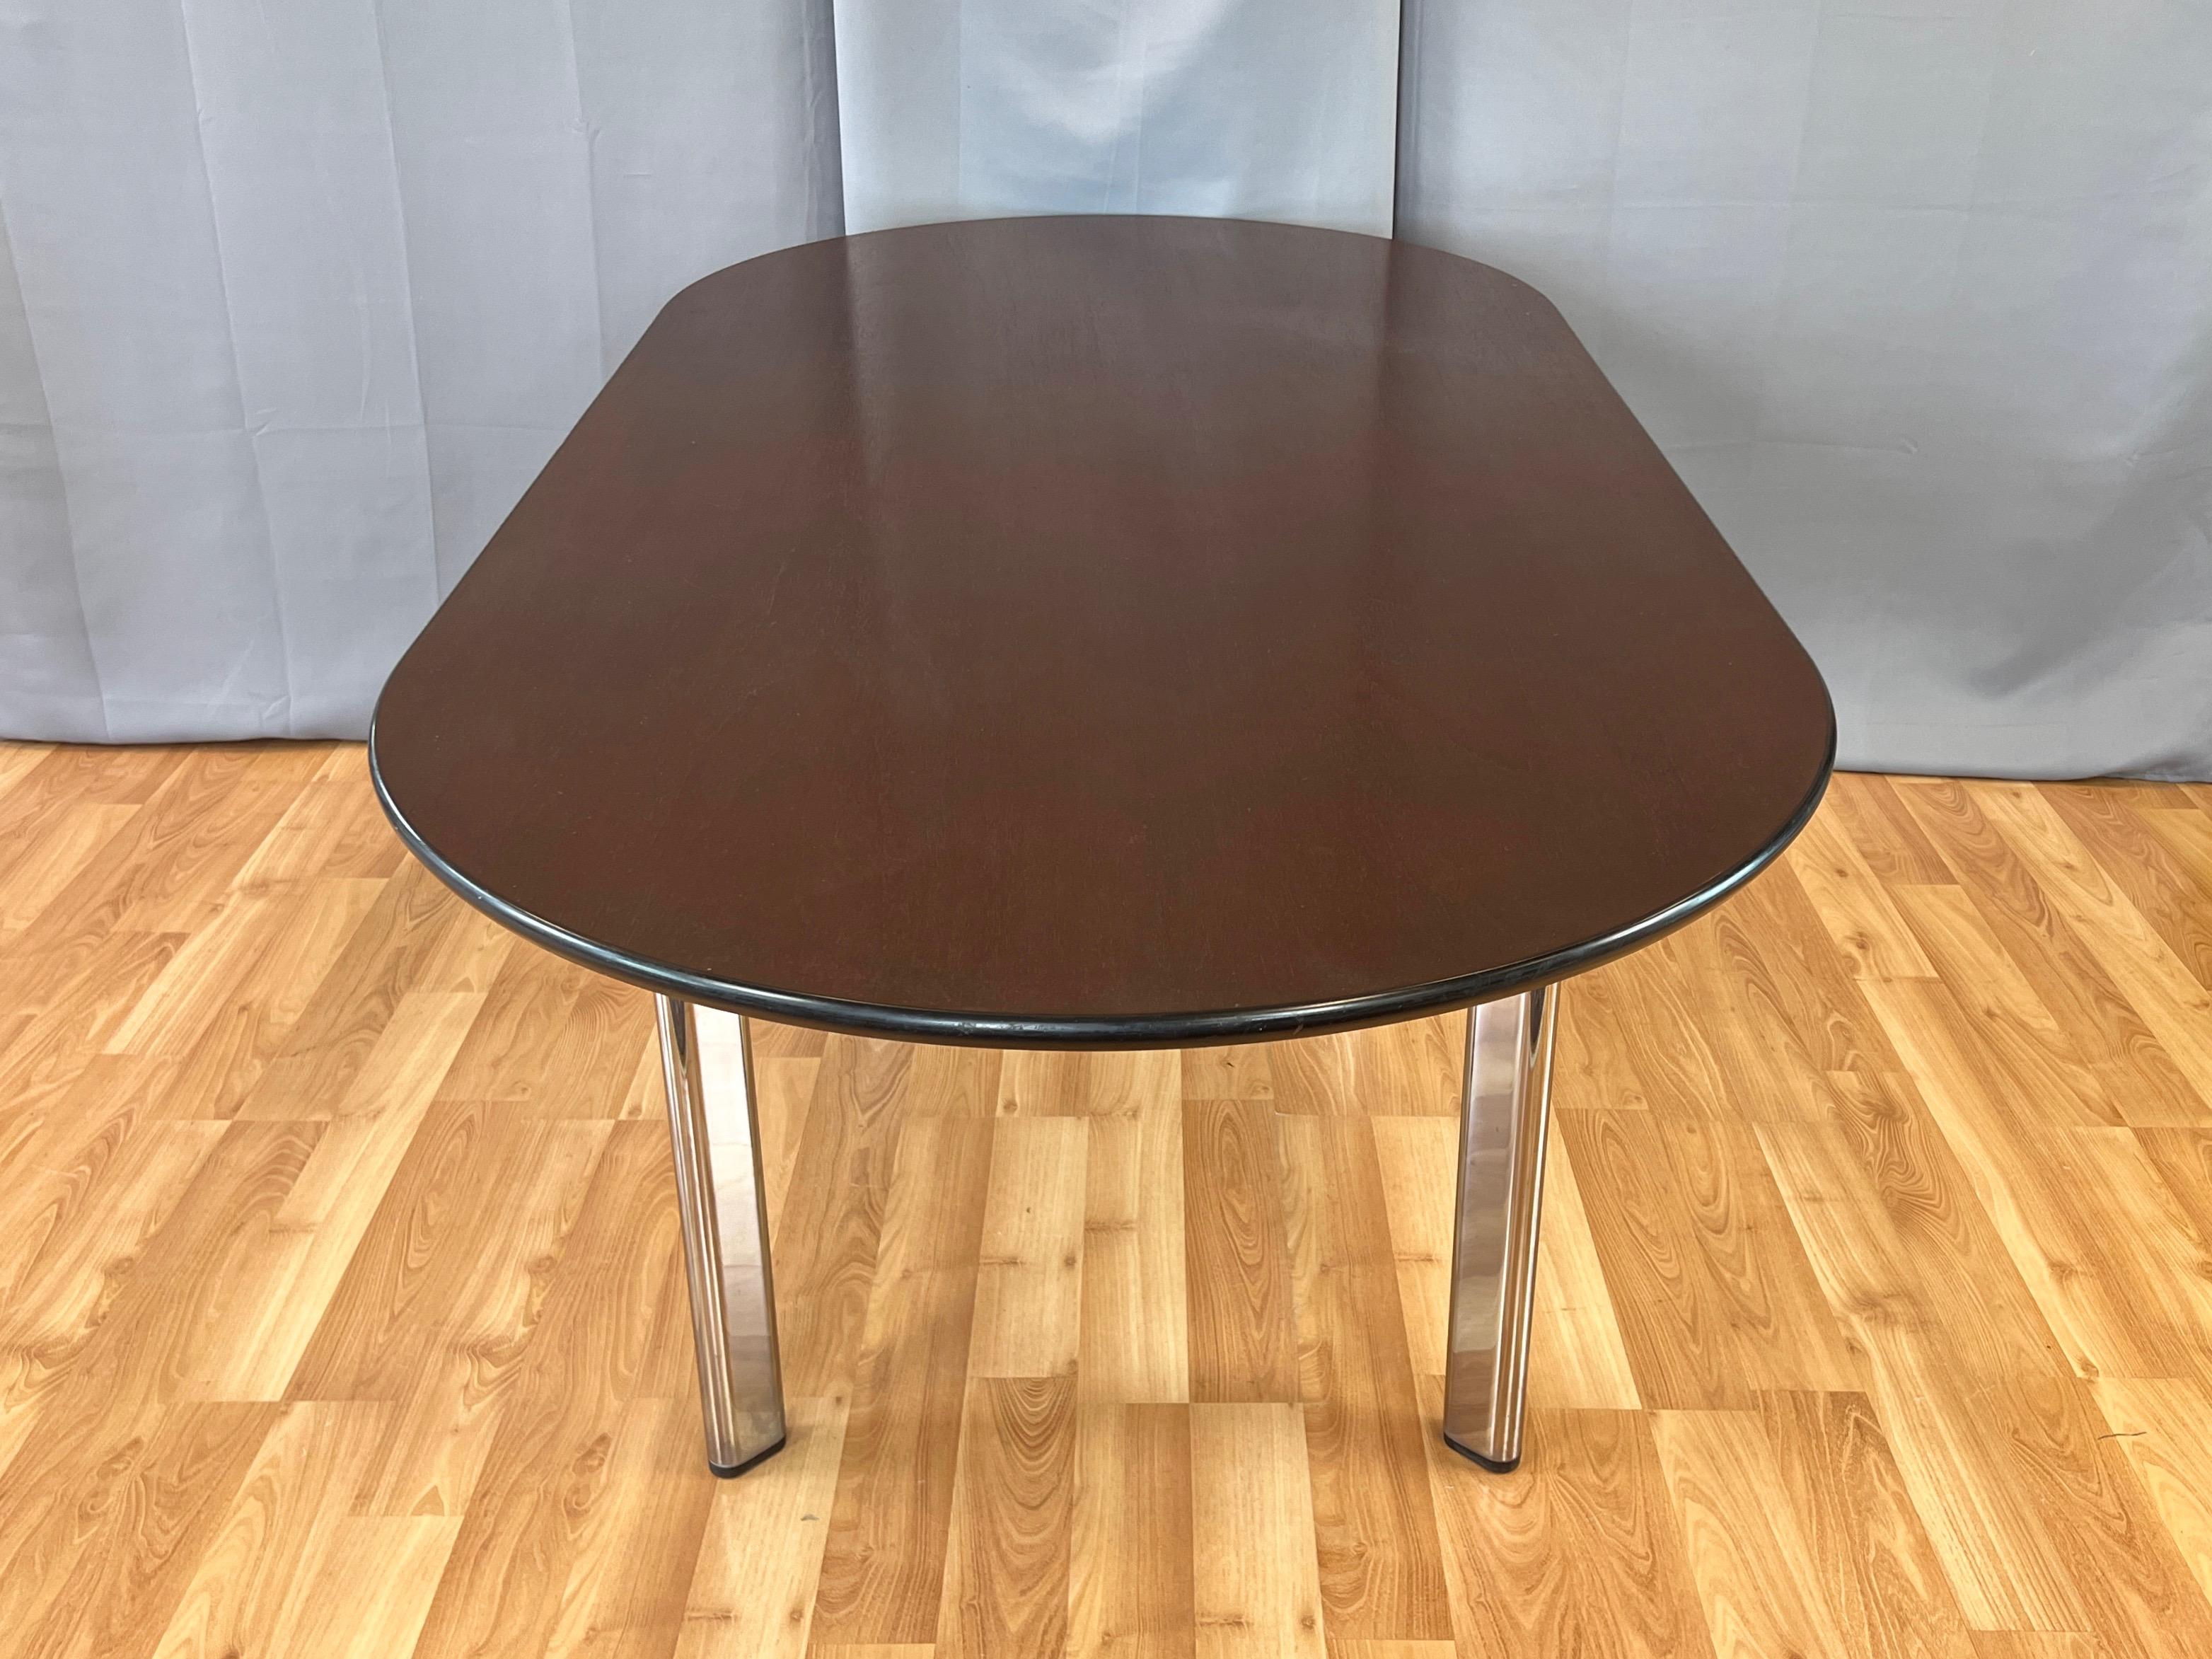 Joseph D’Urso for Knoll High Table in American Cherry and Chrome, 1995 For Sale 4